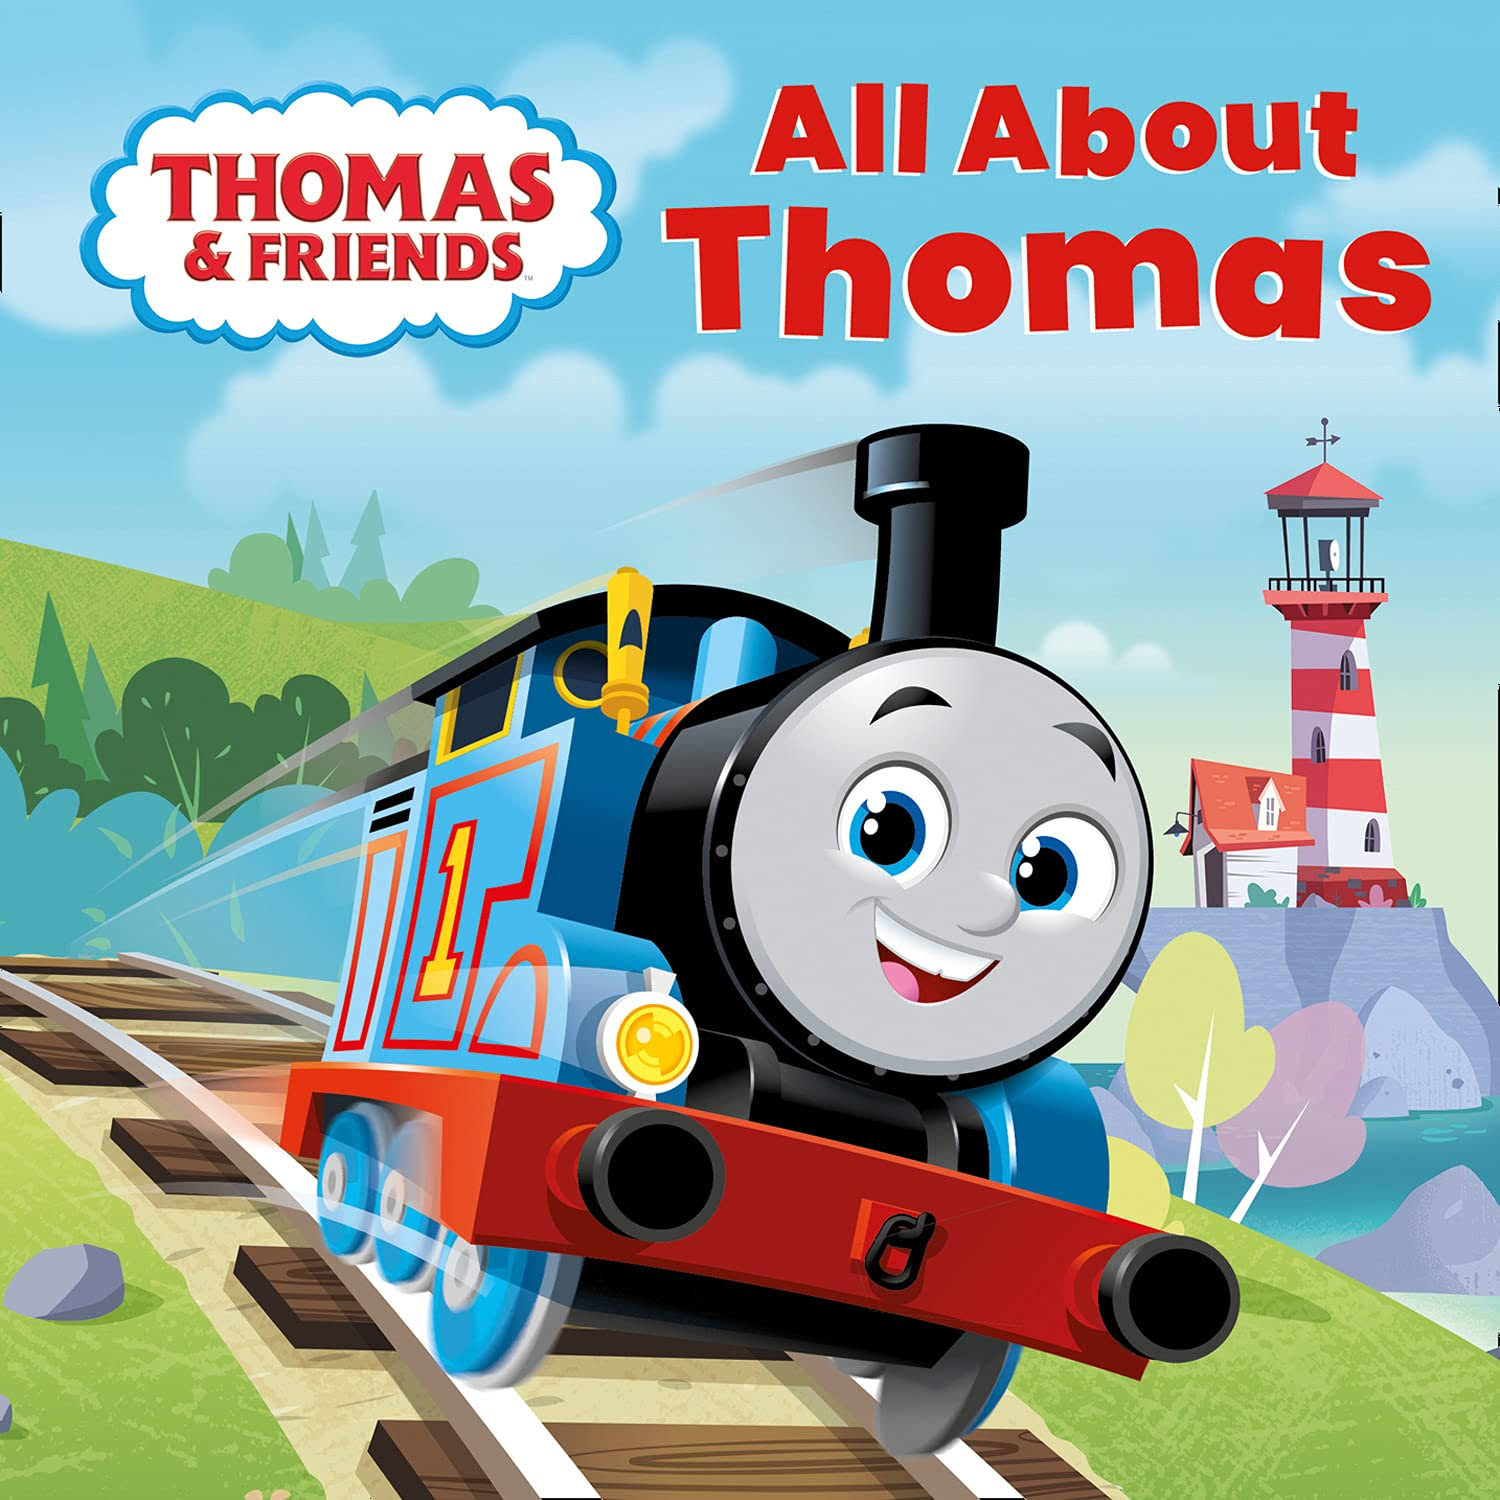 All About Thomas [Book]